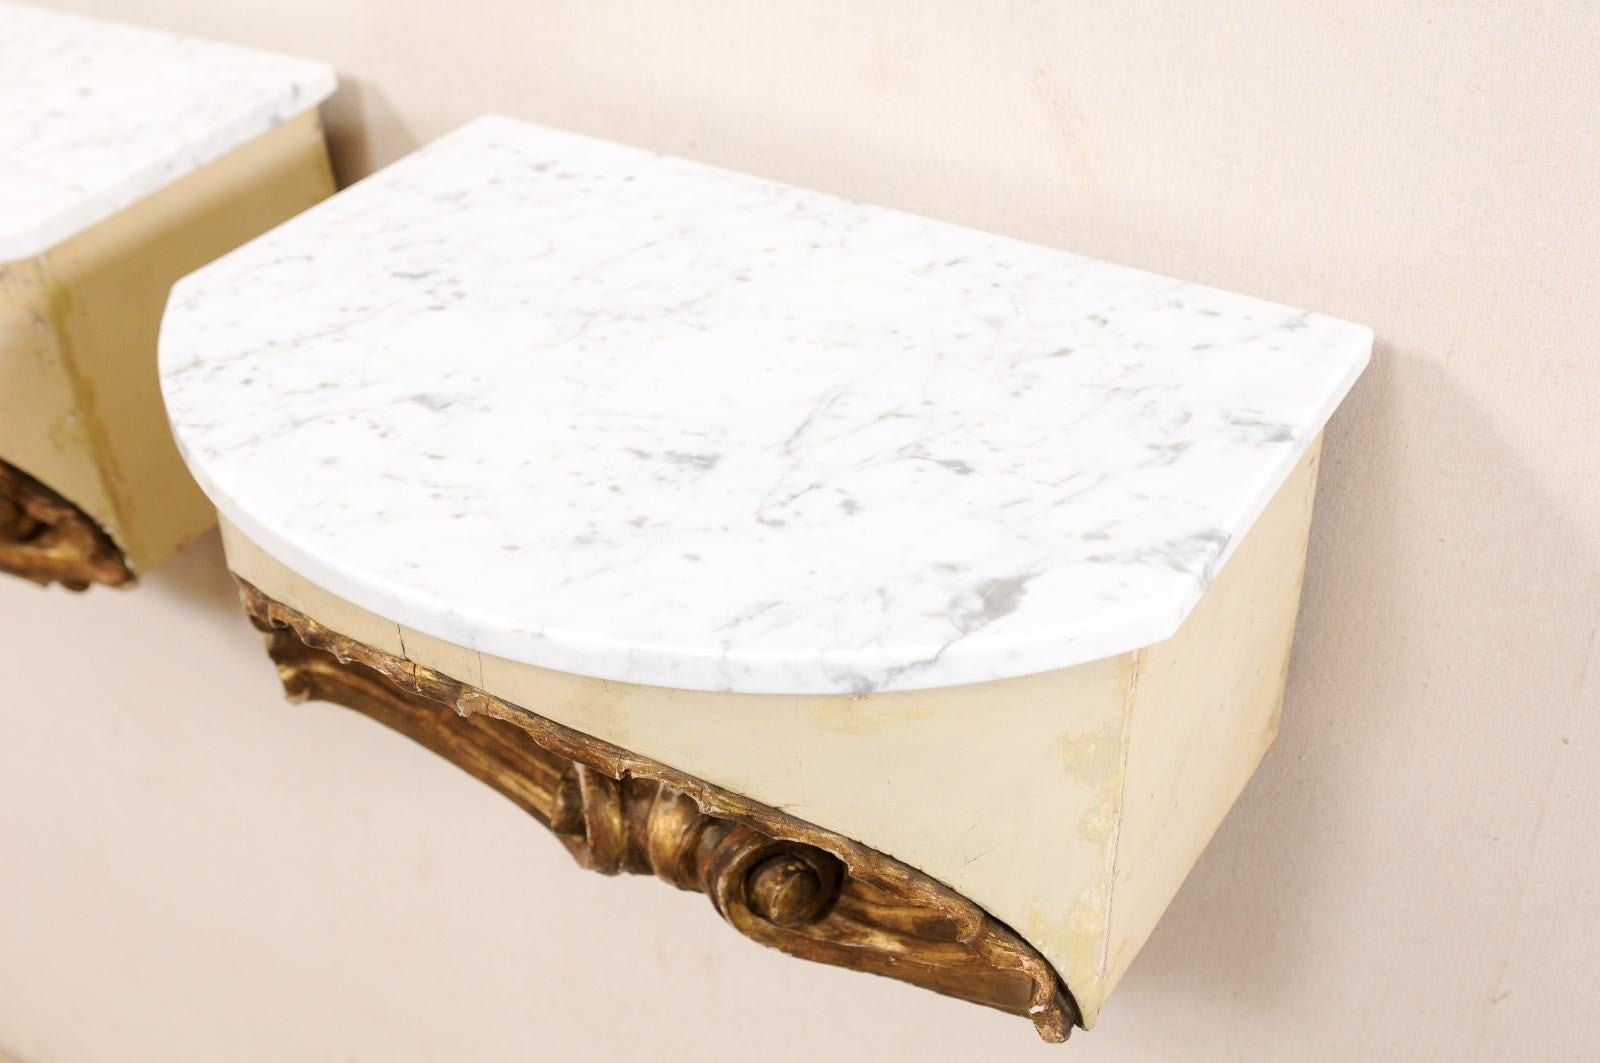 Pair of Early 19th Century Italian Shell Wall-Shelves with Marble Tops For Sale 2